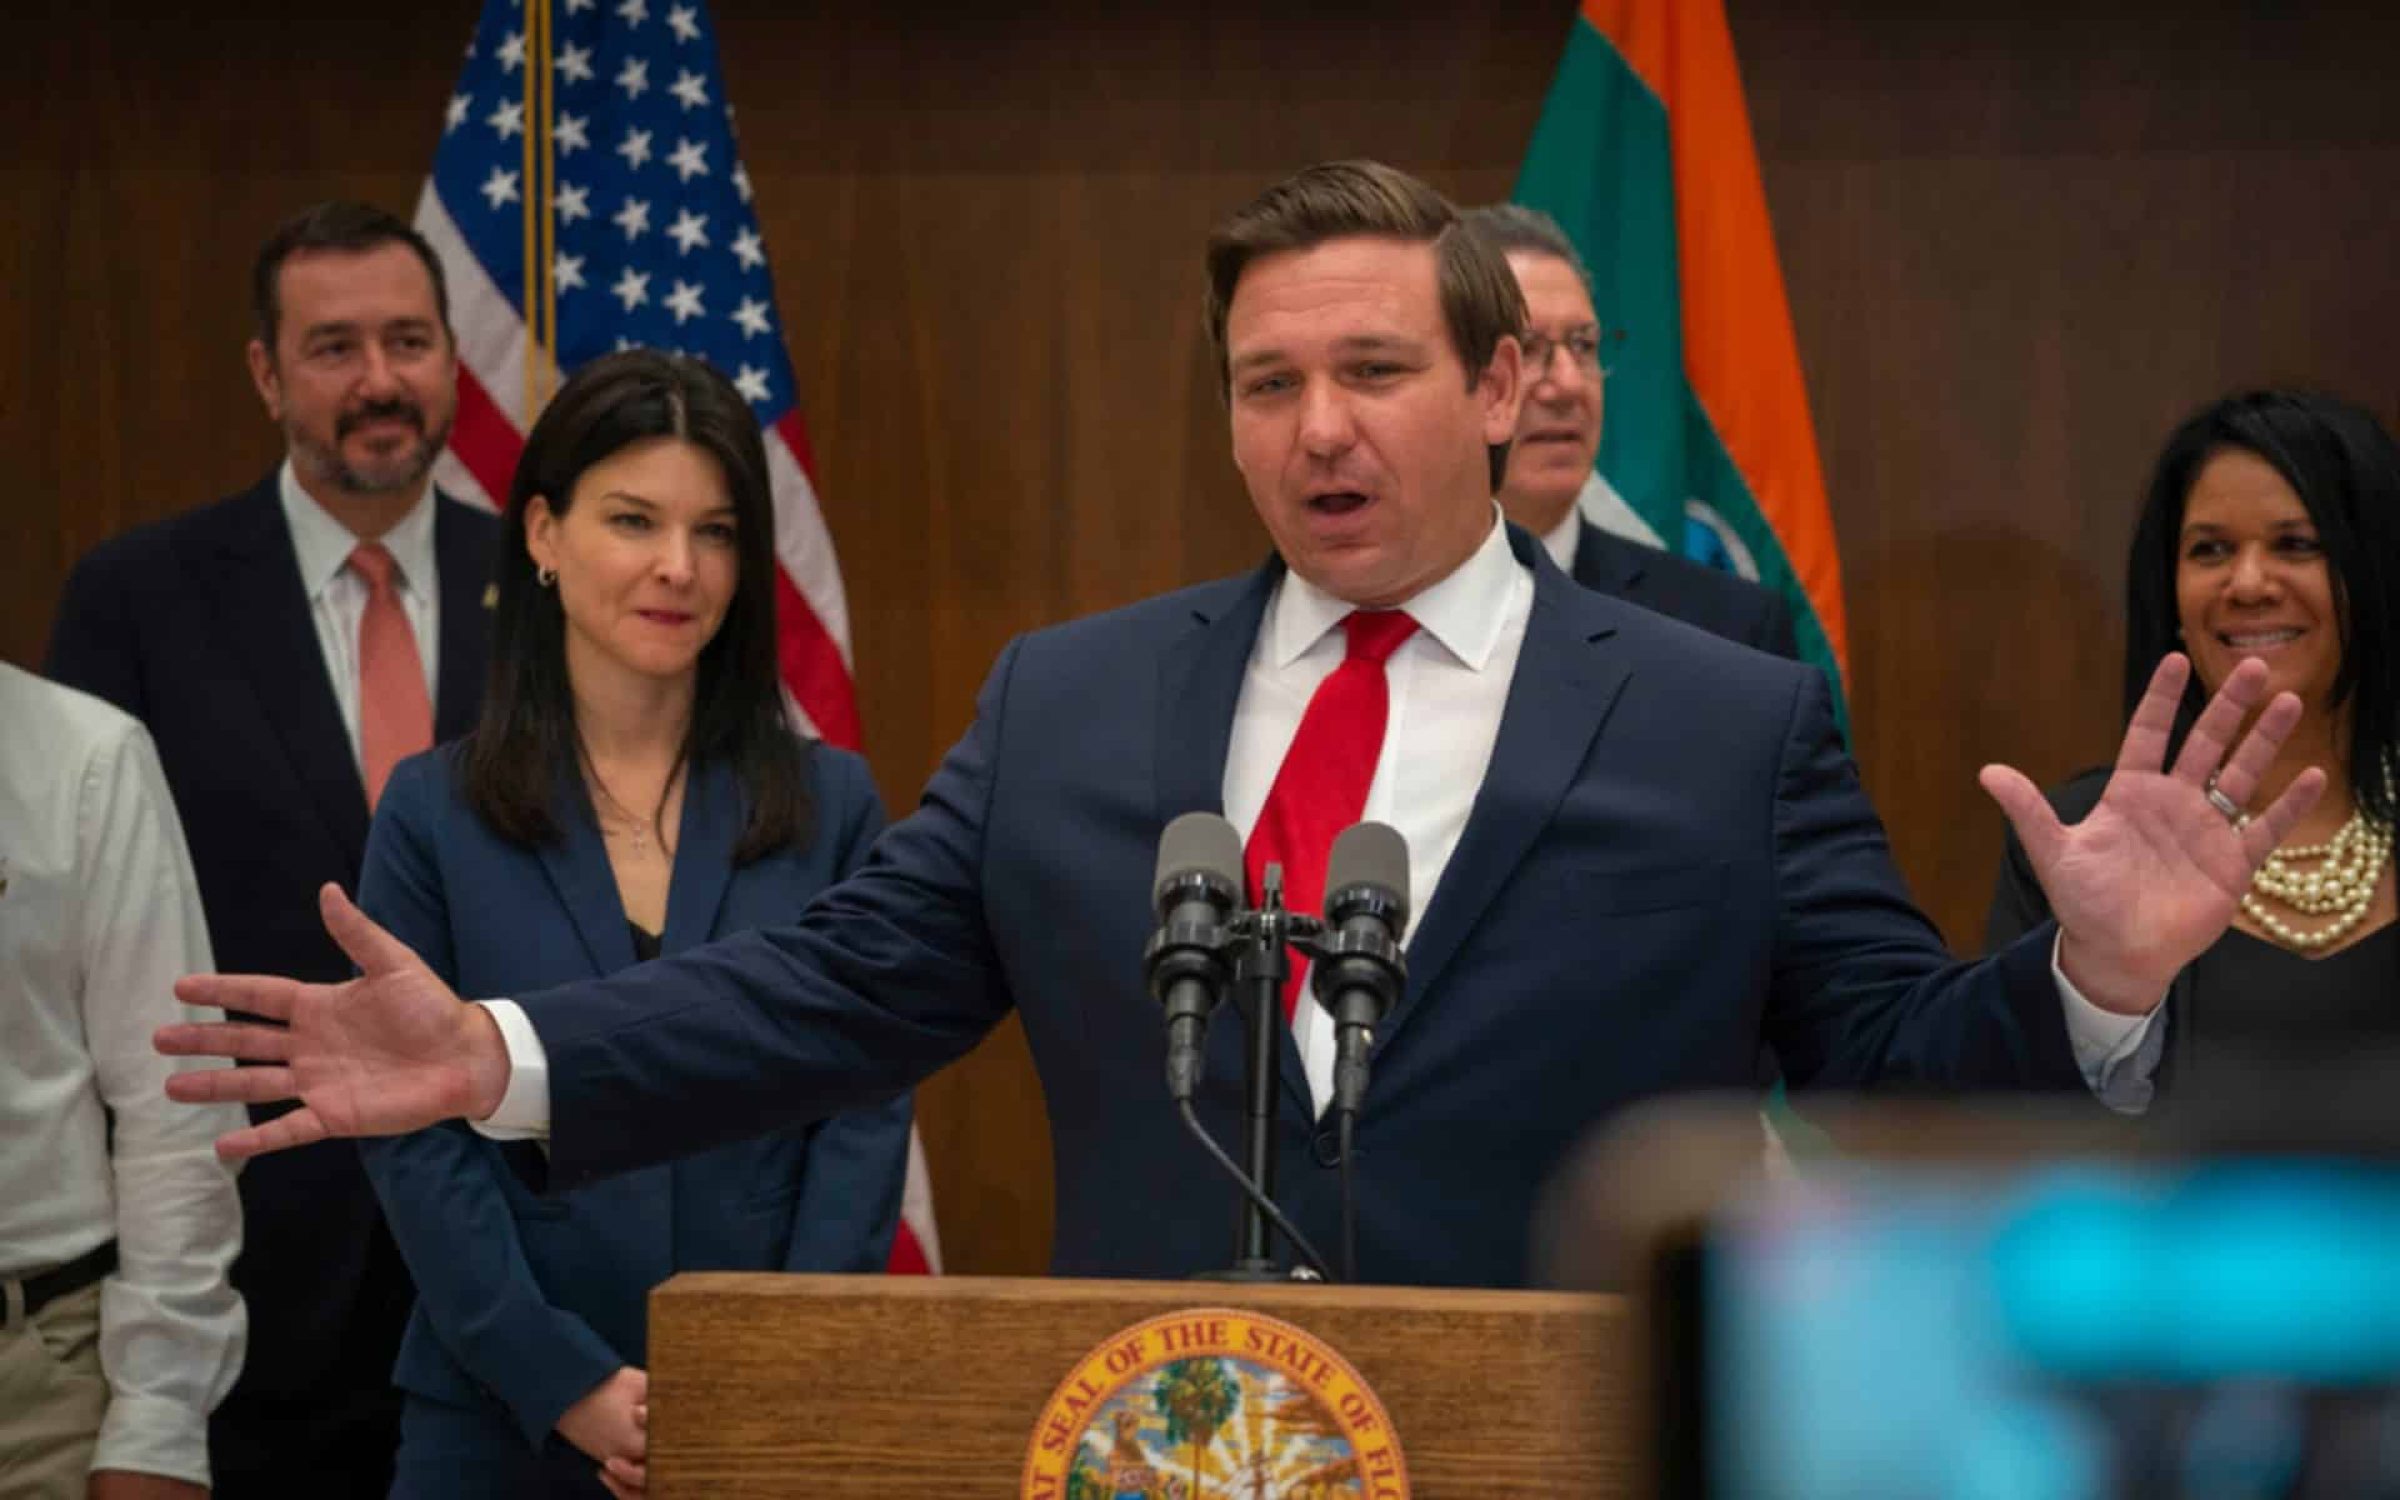 MIAMI, FLORIDA / UNITED STATES - MARCH 27, 2019: Governor Ron DeSantis appoints Michelle Alvarez Barakat and Tanya Brinkley as judges to Miami’s Eleventh Judicial Circuit Court.